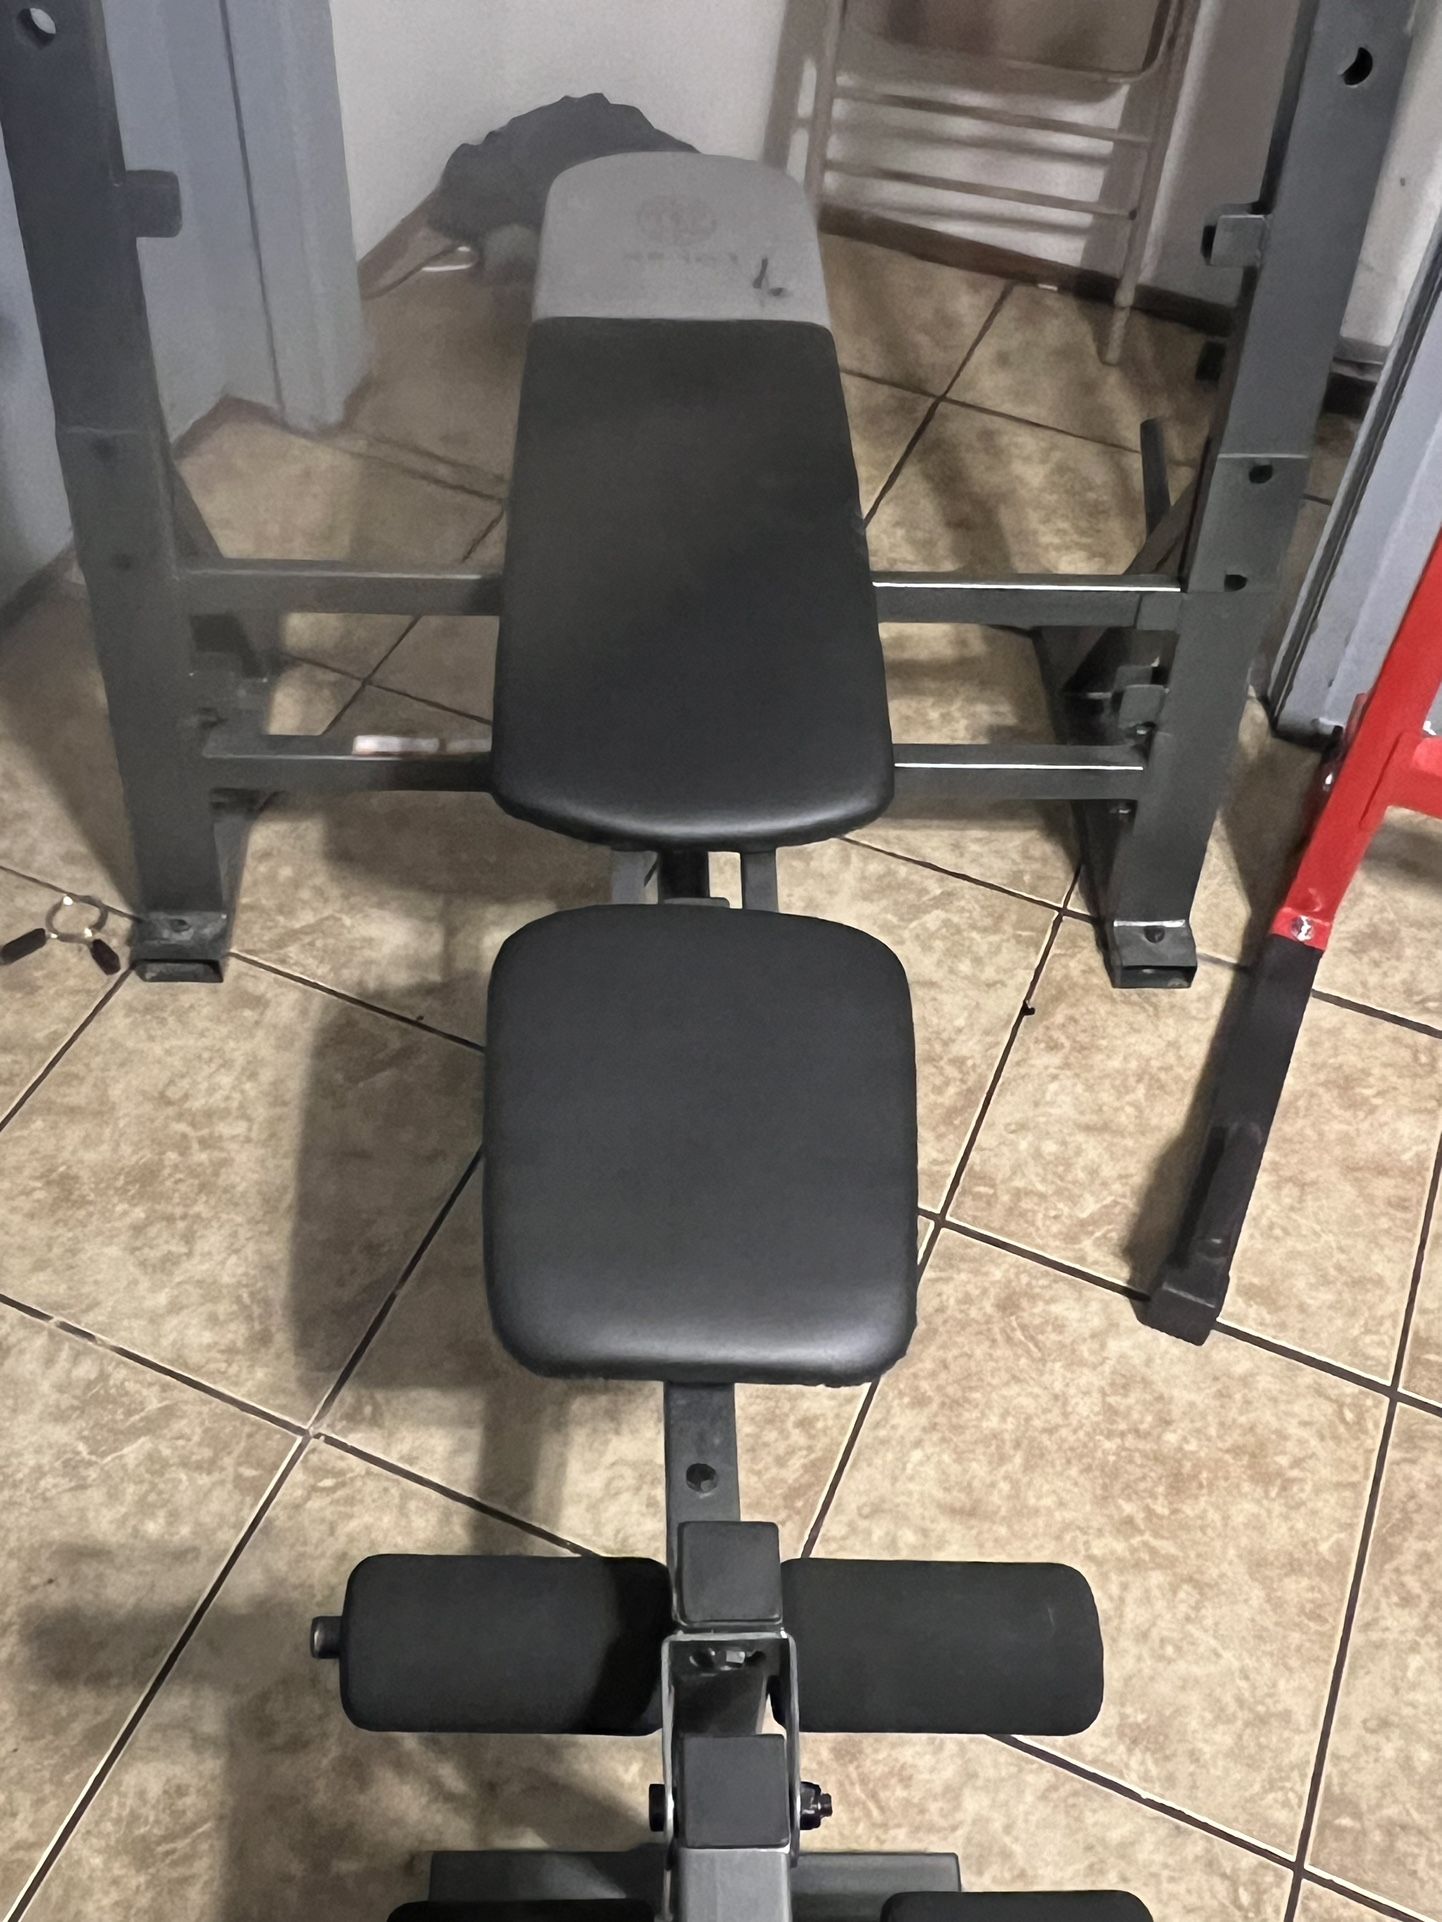 WEIGHT BENCH  $90 OBO 